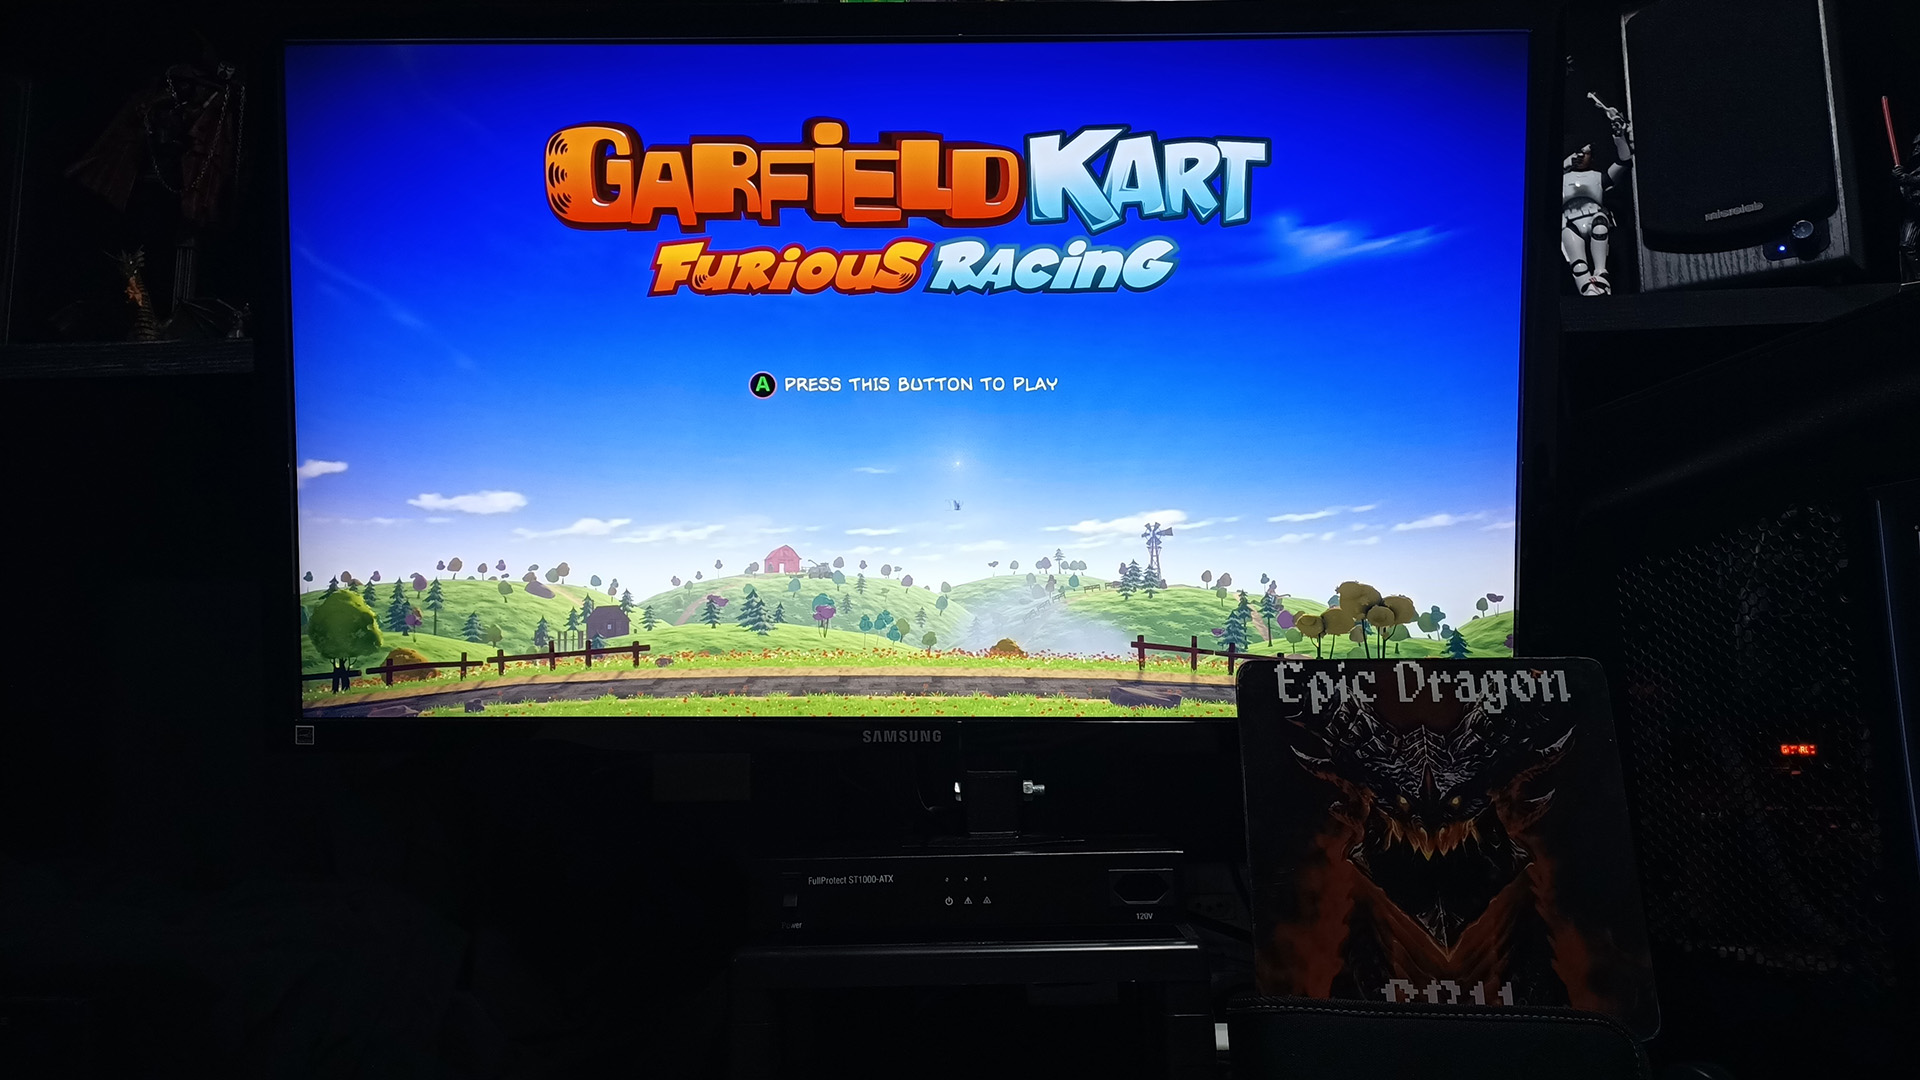 EpicDragon: Garfield Kart Furious Racing: Pastacosi Factory [Time Trial: Lap Time] (PC) 0:00:49.635 points on 2022-08-08 21:23:07